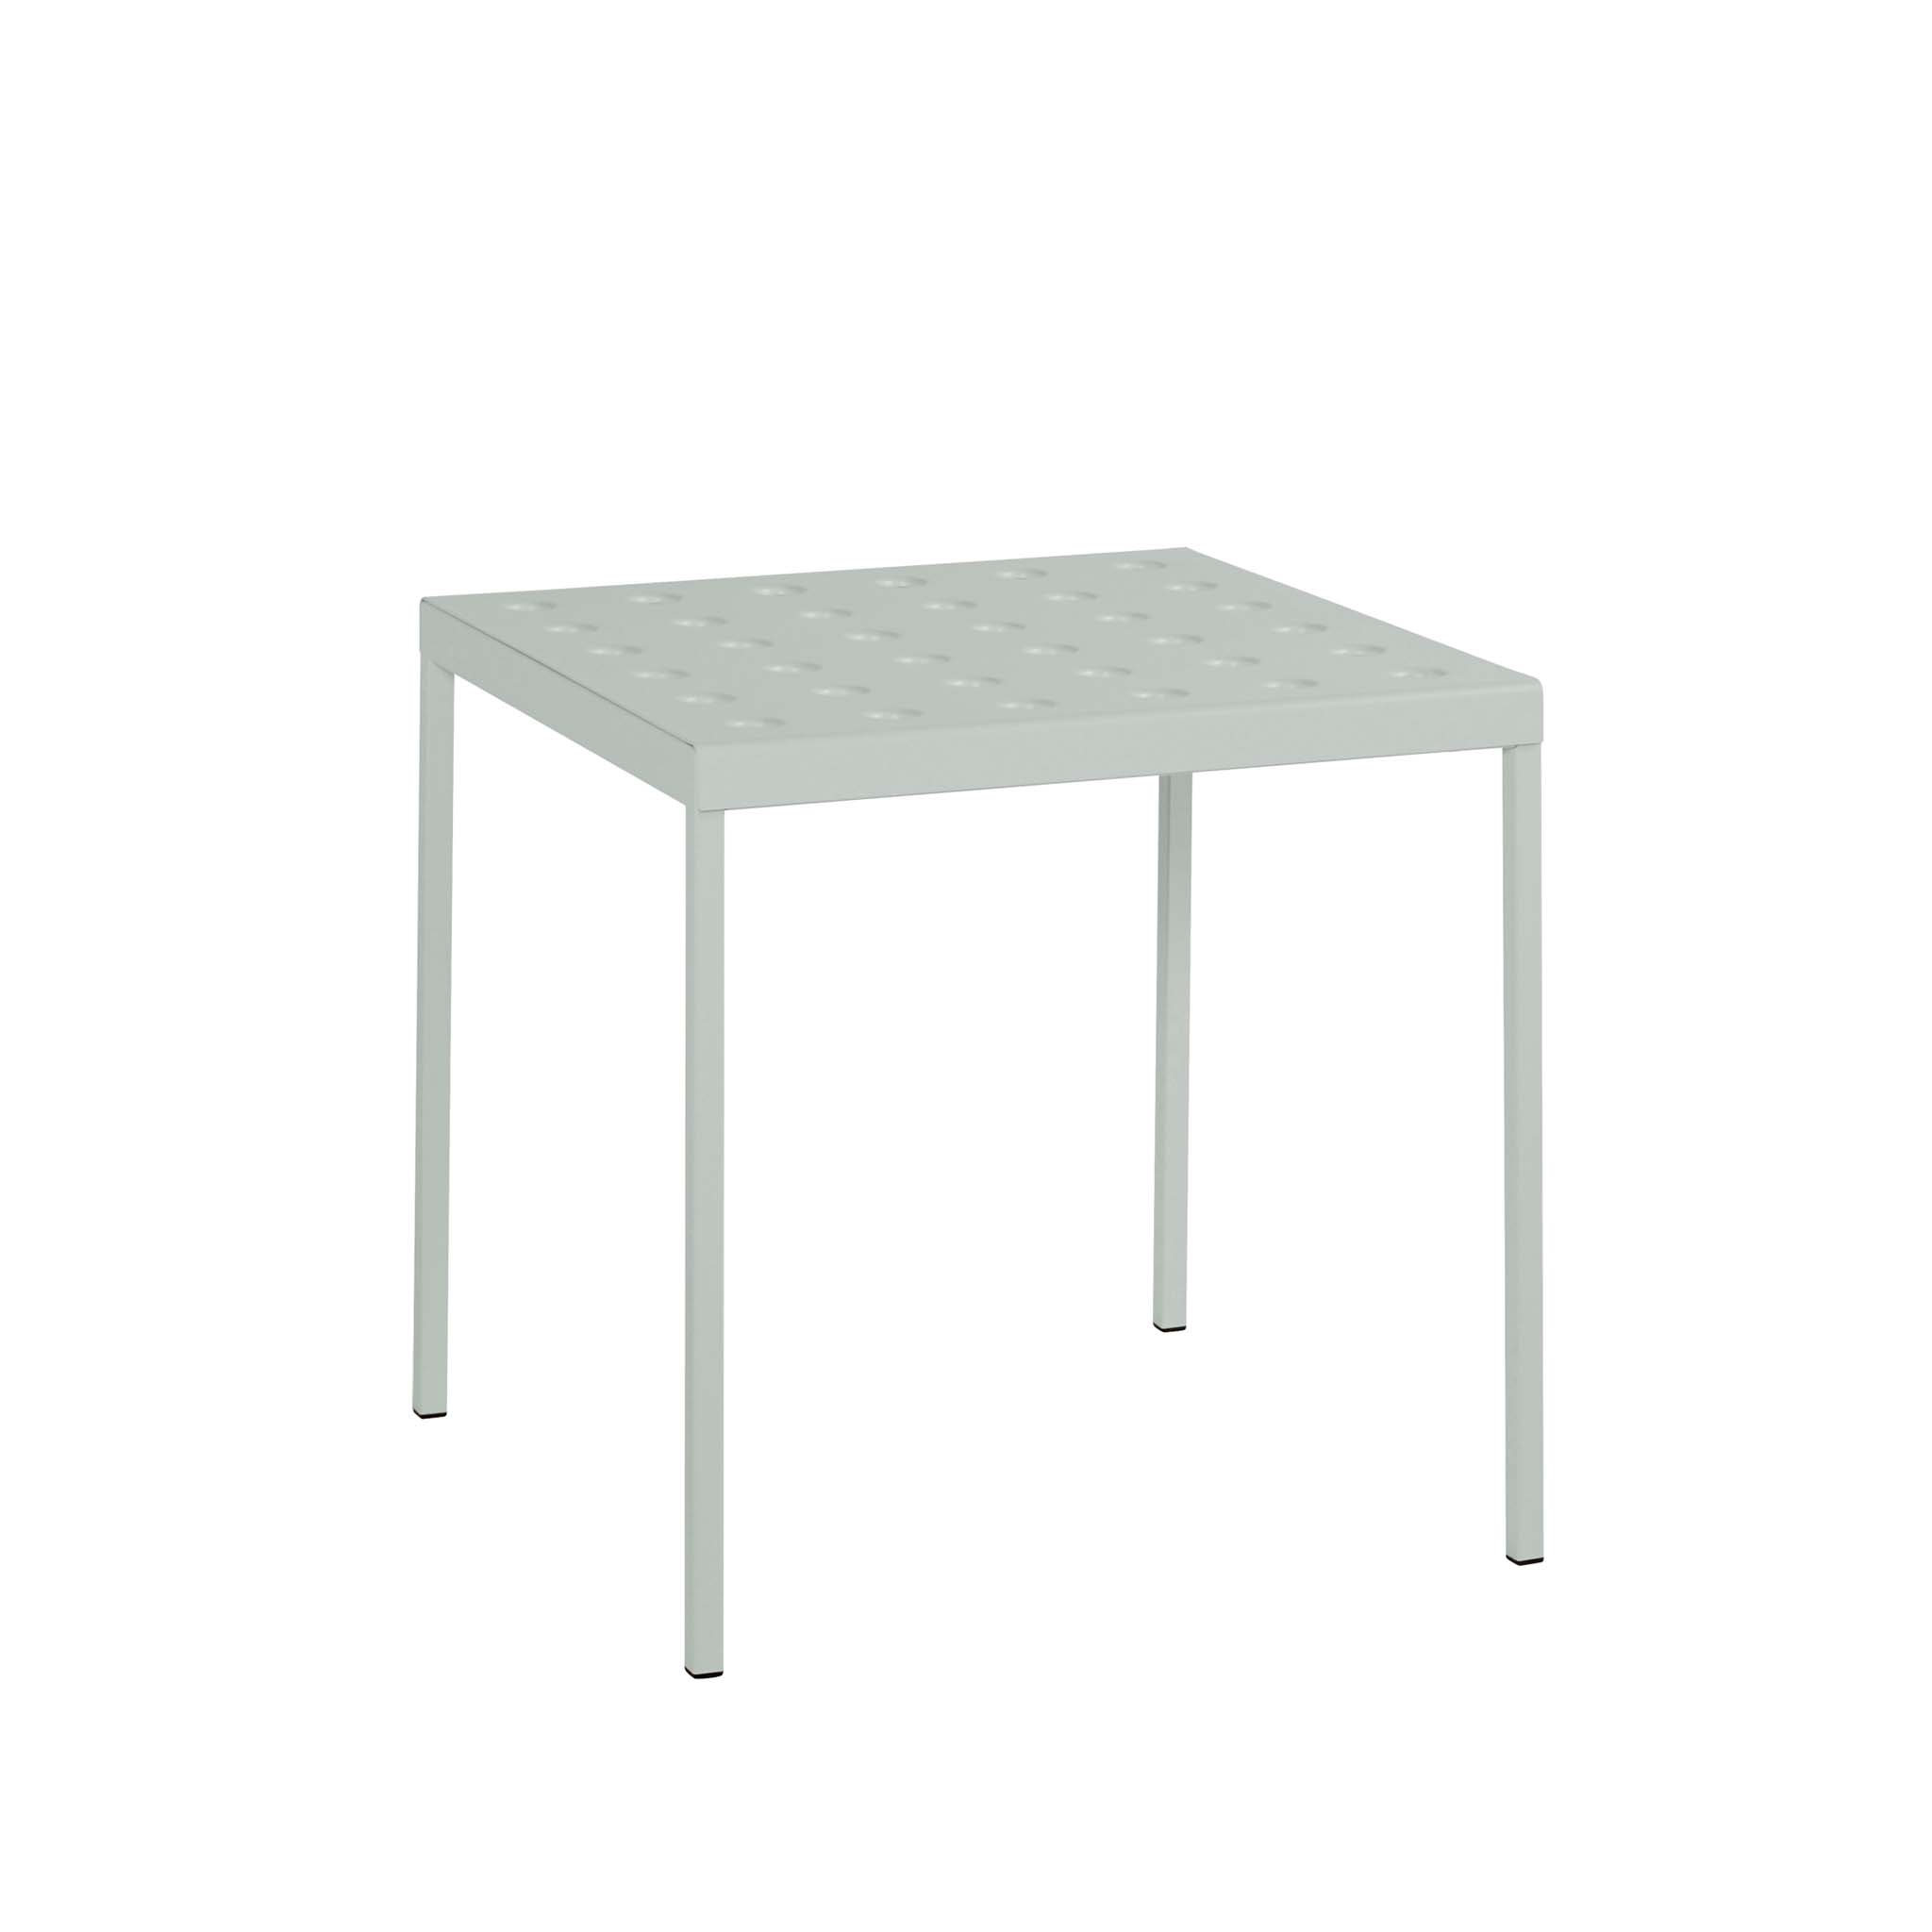 Clearance Balcony Table / Small L75cm / Desert Green /  By Ronan and Erwan Bouroullec for Hay